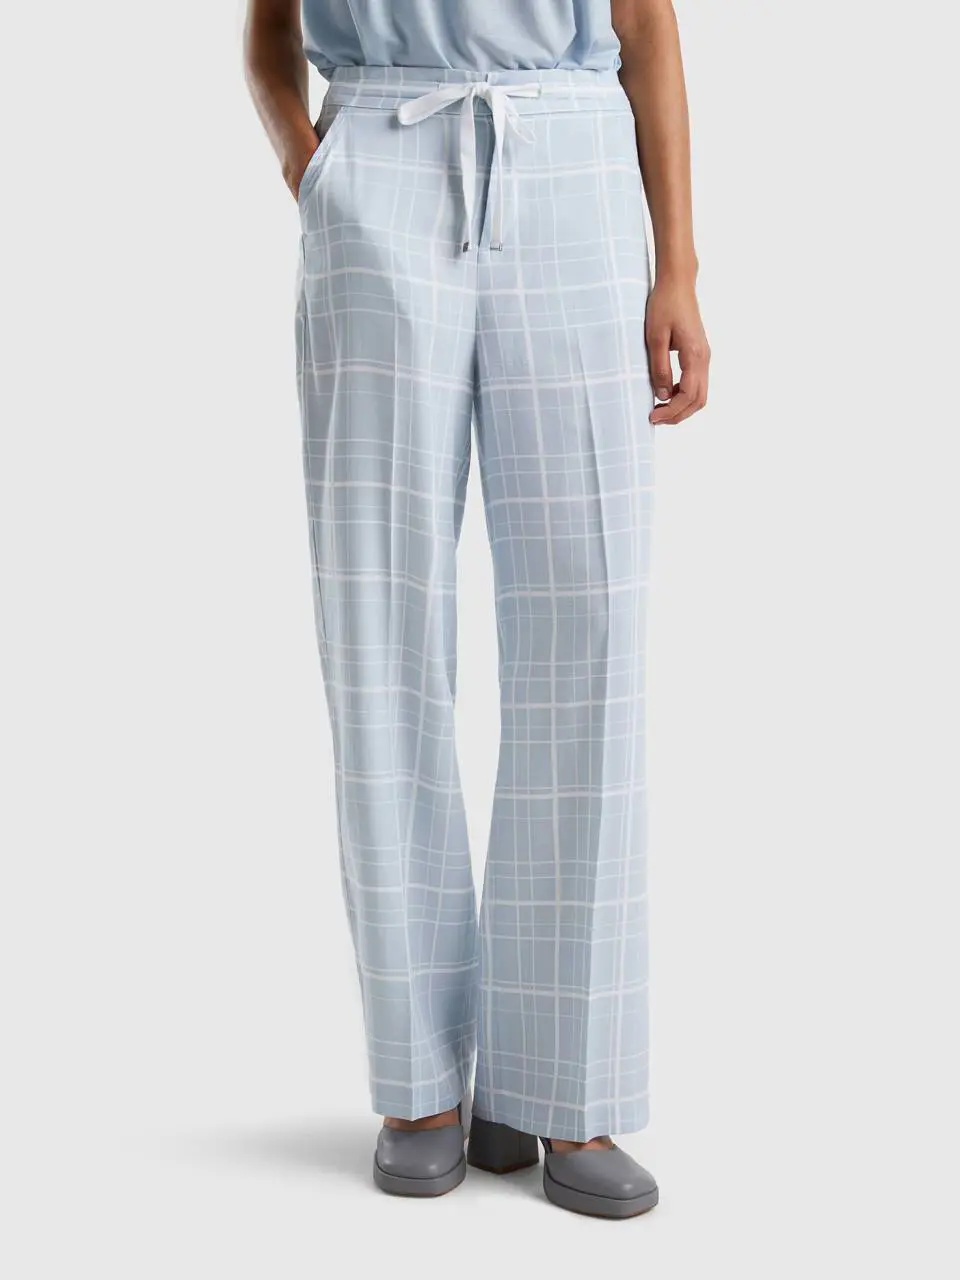 Benetton printed trousers with drawstring. 1